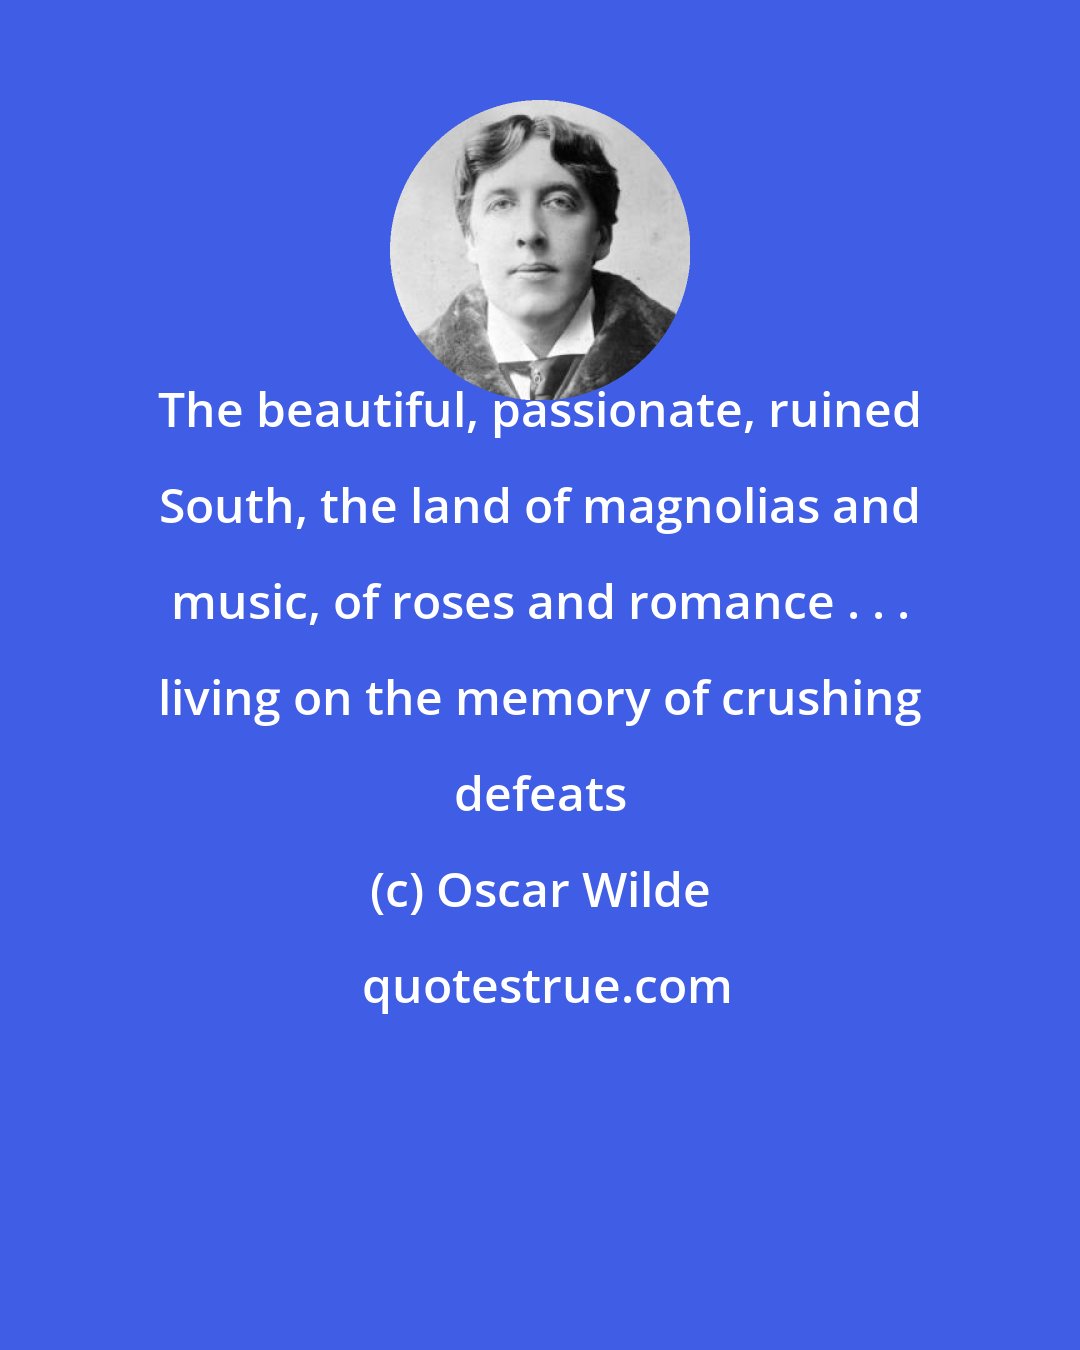 Oscar Wilde: The beautiful, passionate, ruined South, the land of magnolias and music, of roses and romance . . . living on the memory of crushing defeats